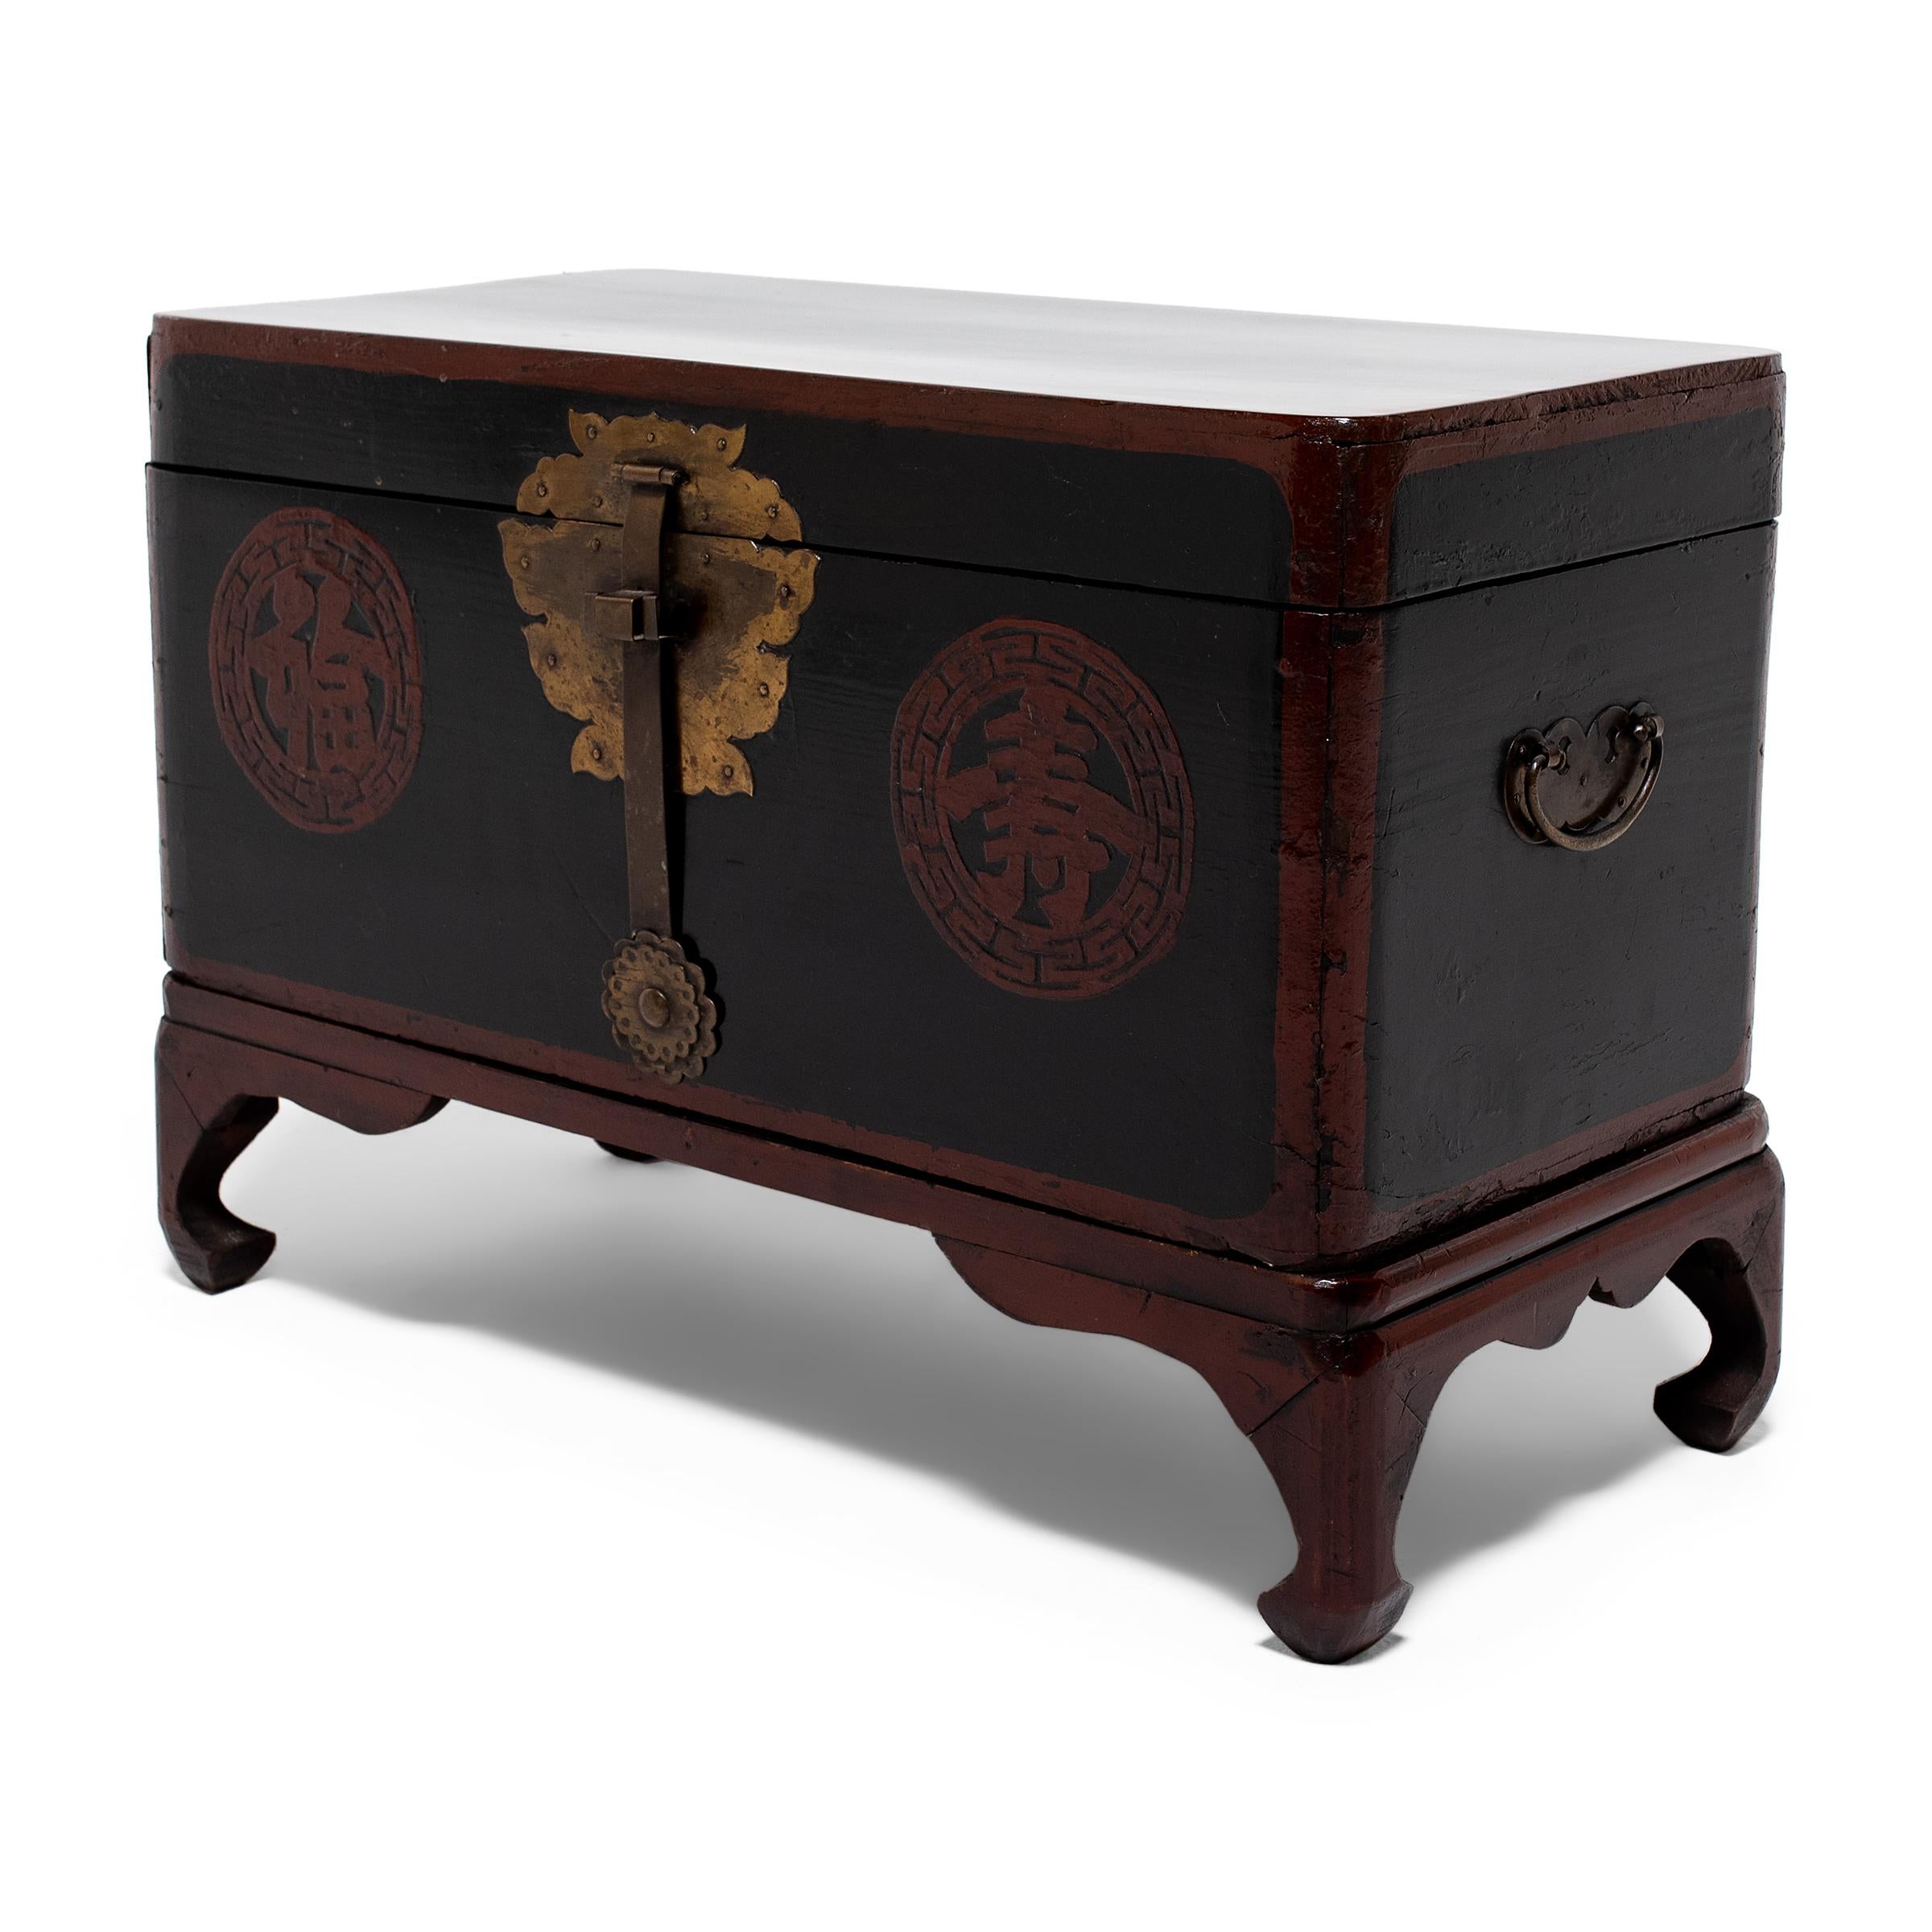 This lacquered wedding chest dates to the early 20th century and was likely originally used as a bridewealth chest during a traditional Korean wedding ceremony. The exterior is finished with red and black lacquer and decorated with two round